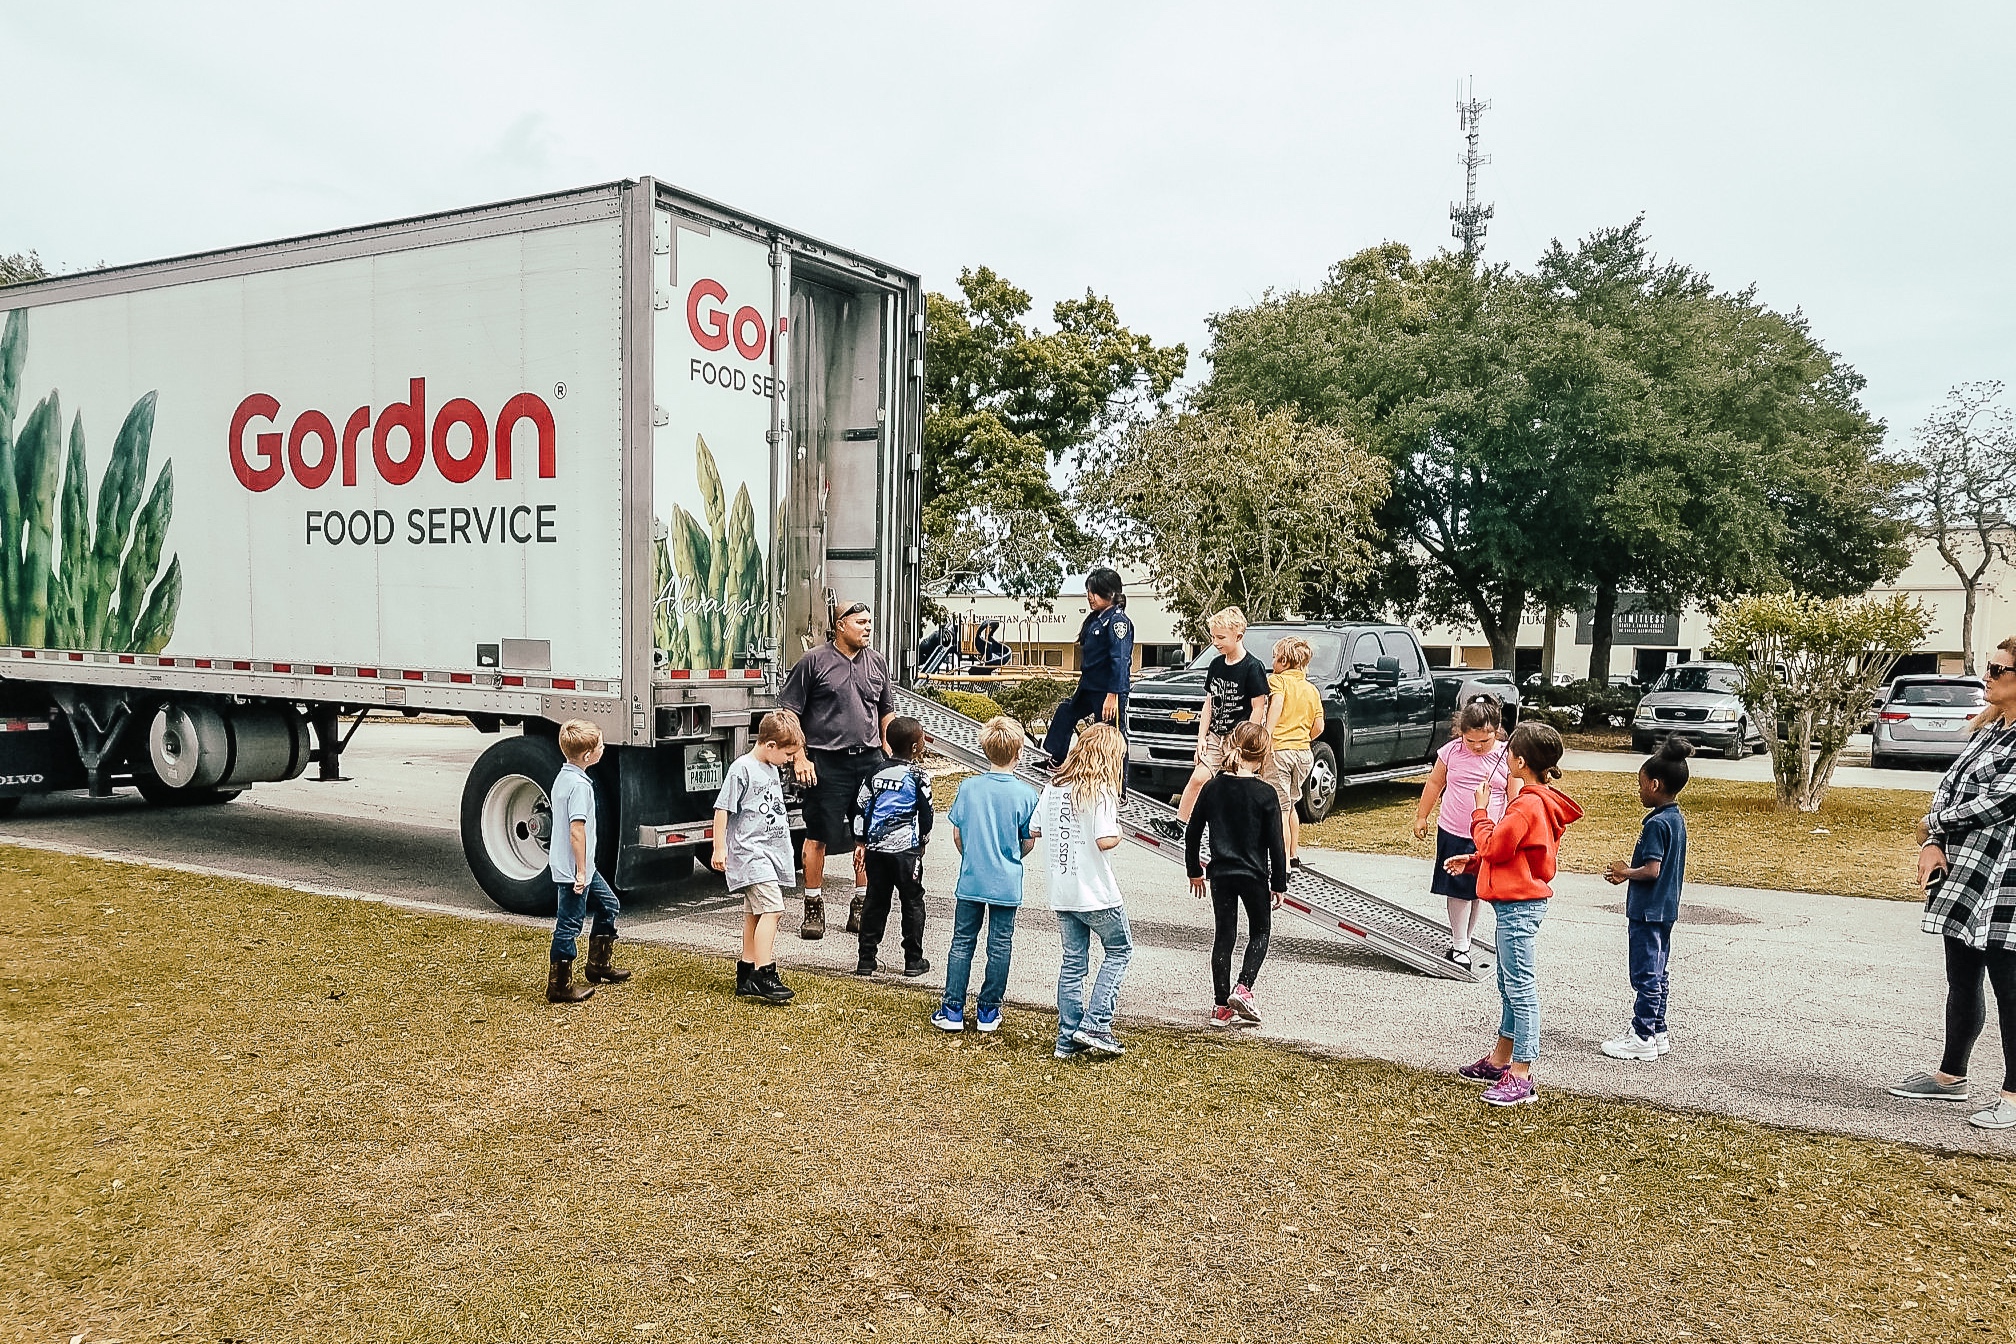 Elementary Students Touring a Food Service Truck